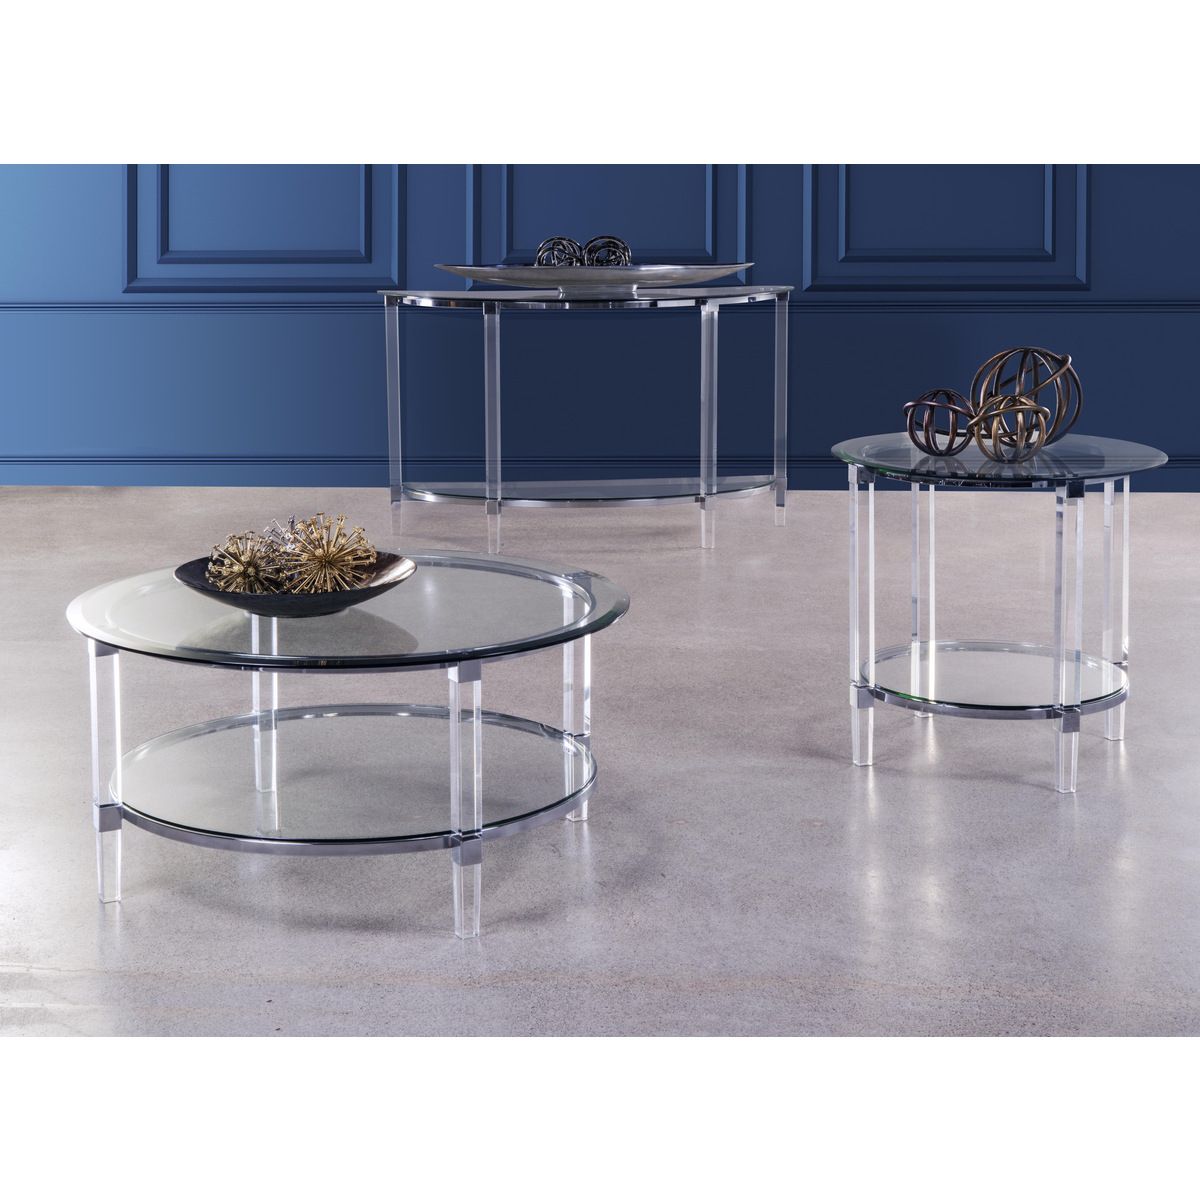 Popular 3656 01 Round Coffee Table With Acrylic Legs Pertaining To Acrylic Coffee Tables (View 12 of 20)